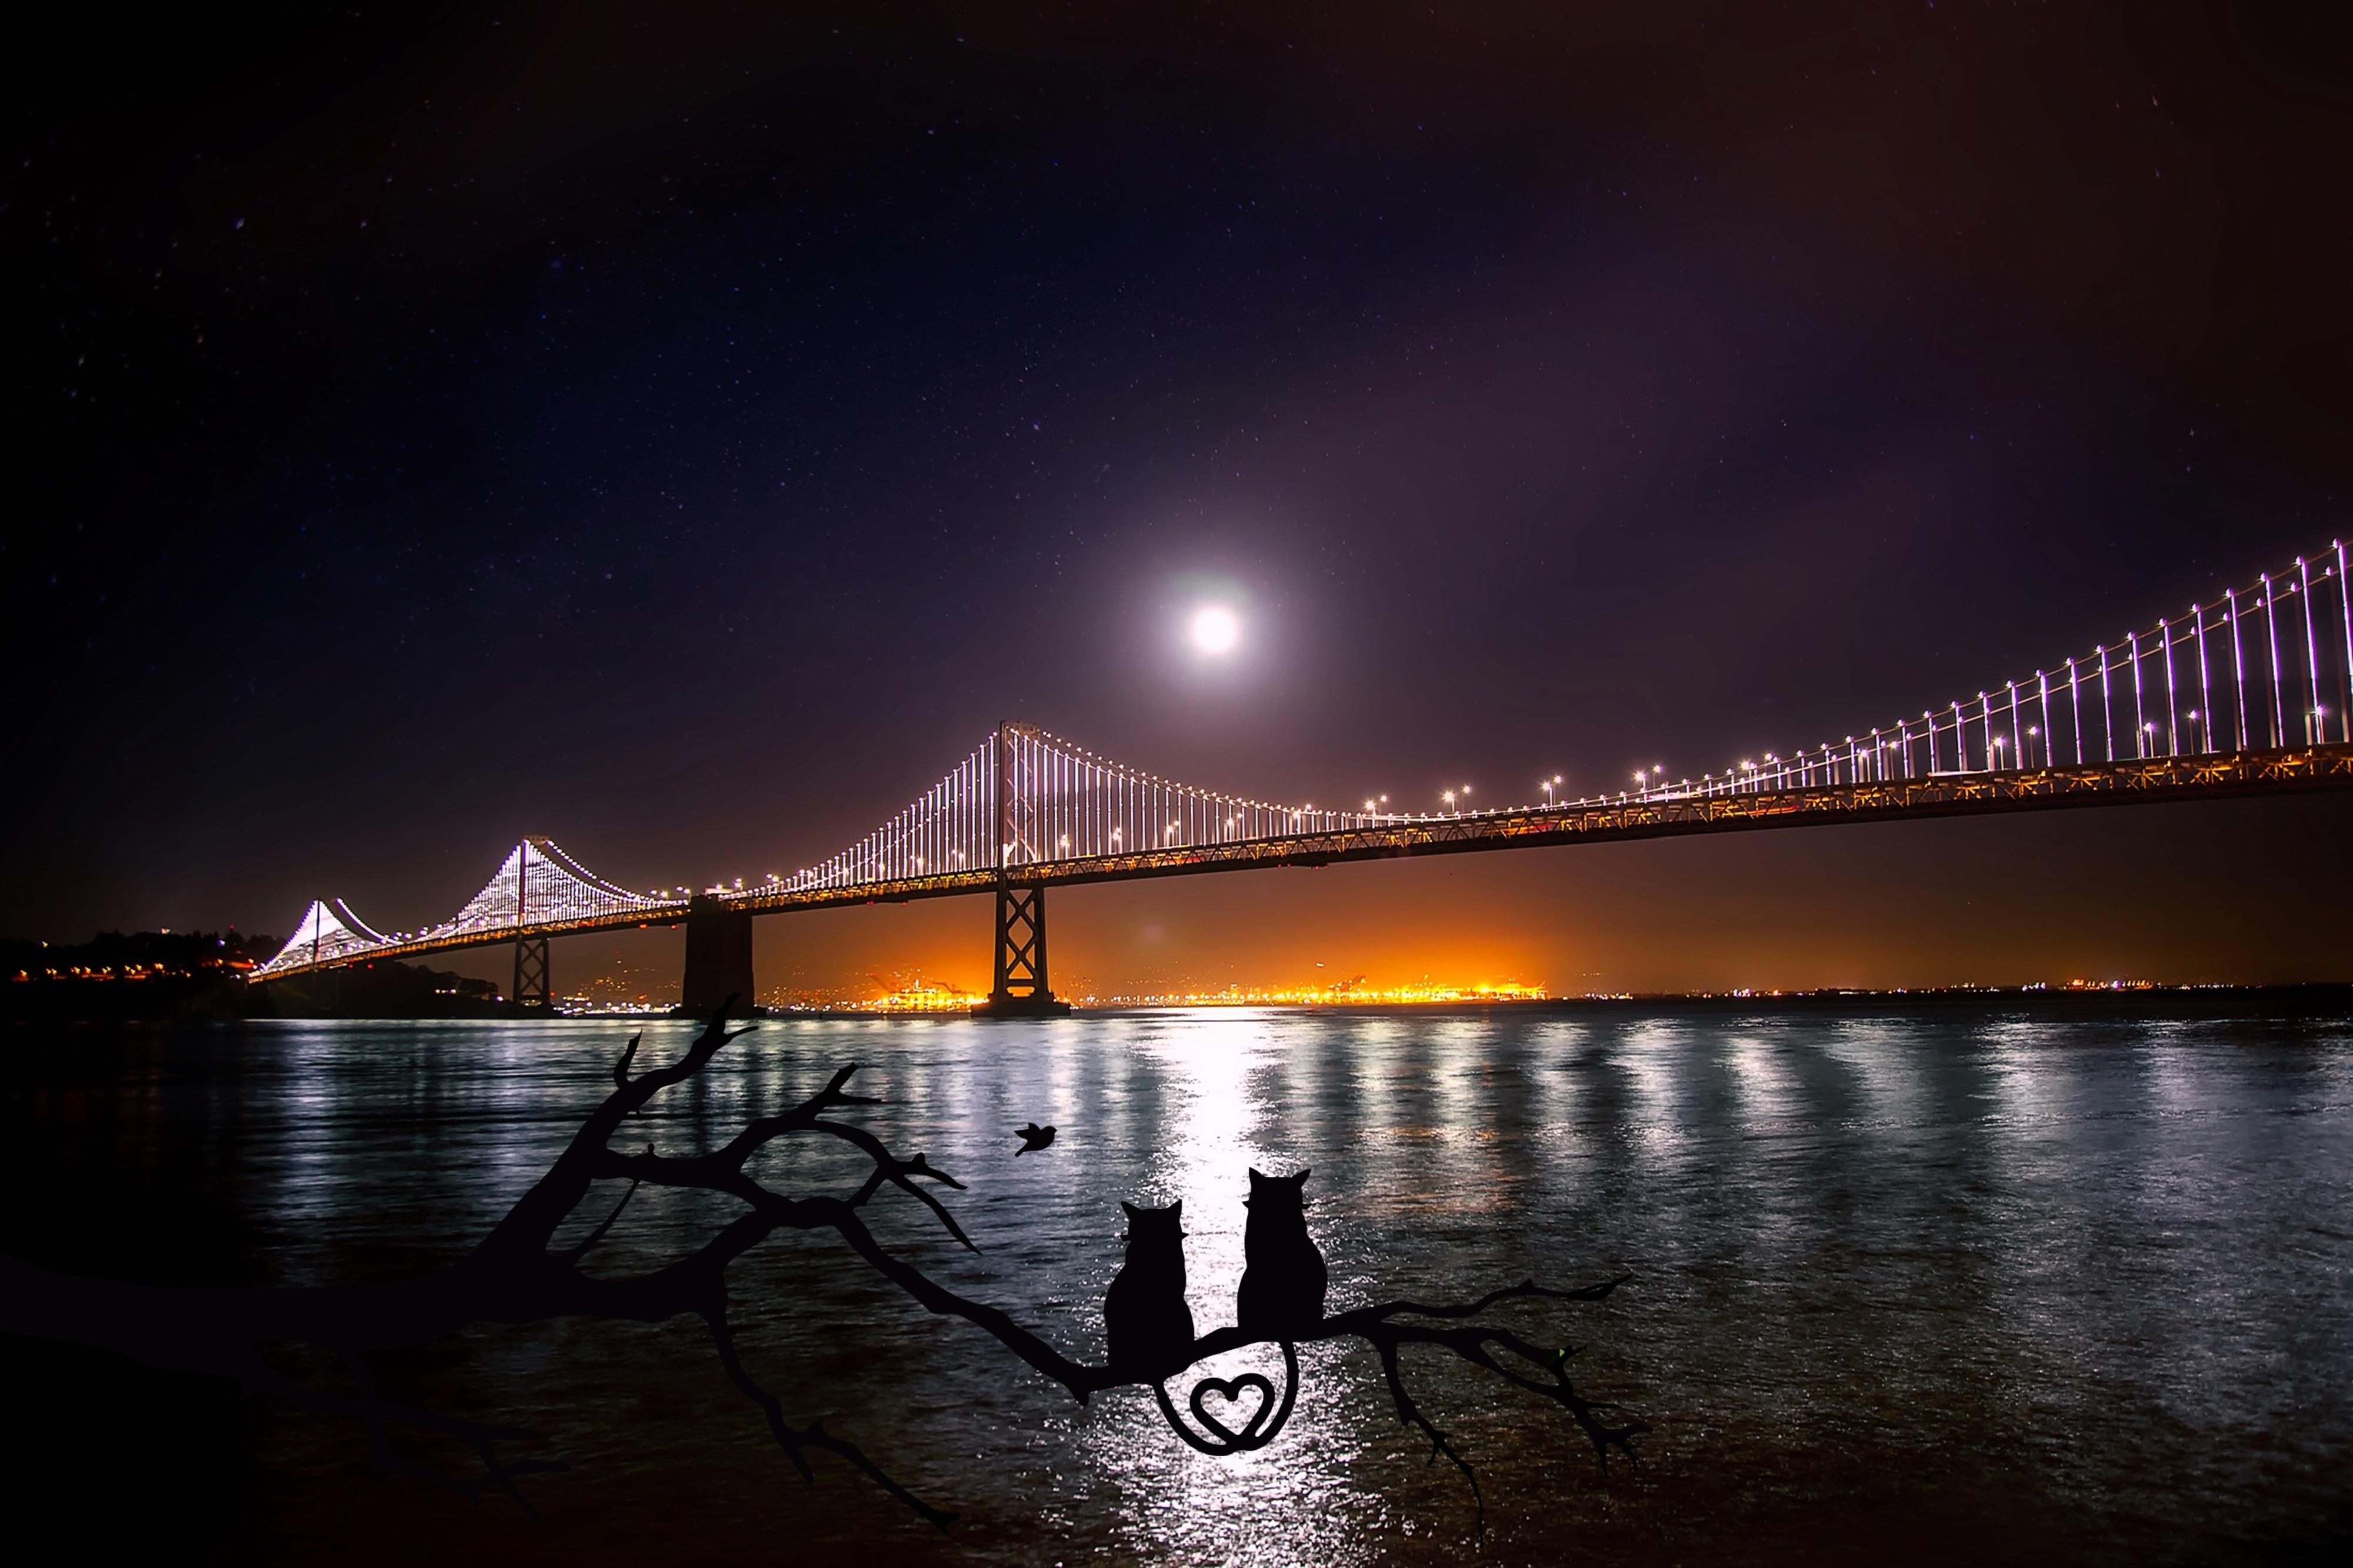 Picture Photo painting on canvas - San Francisco at night 3